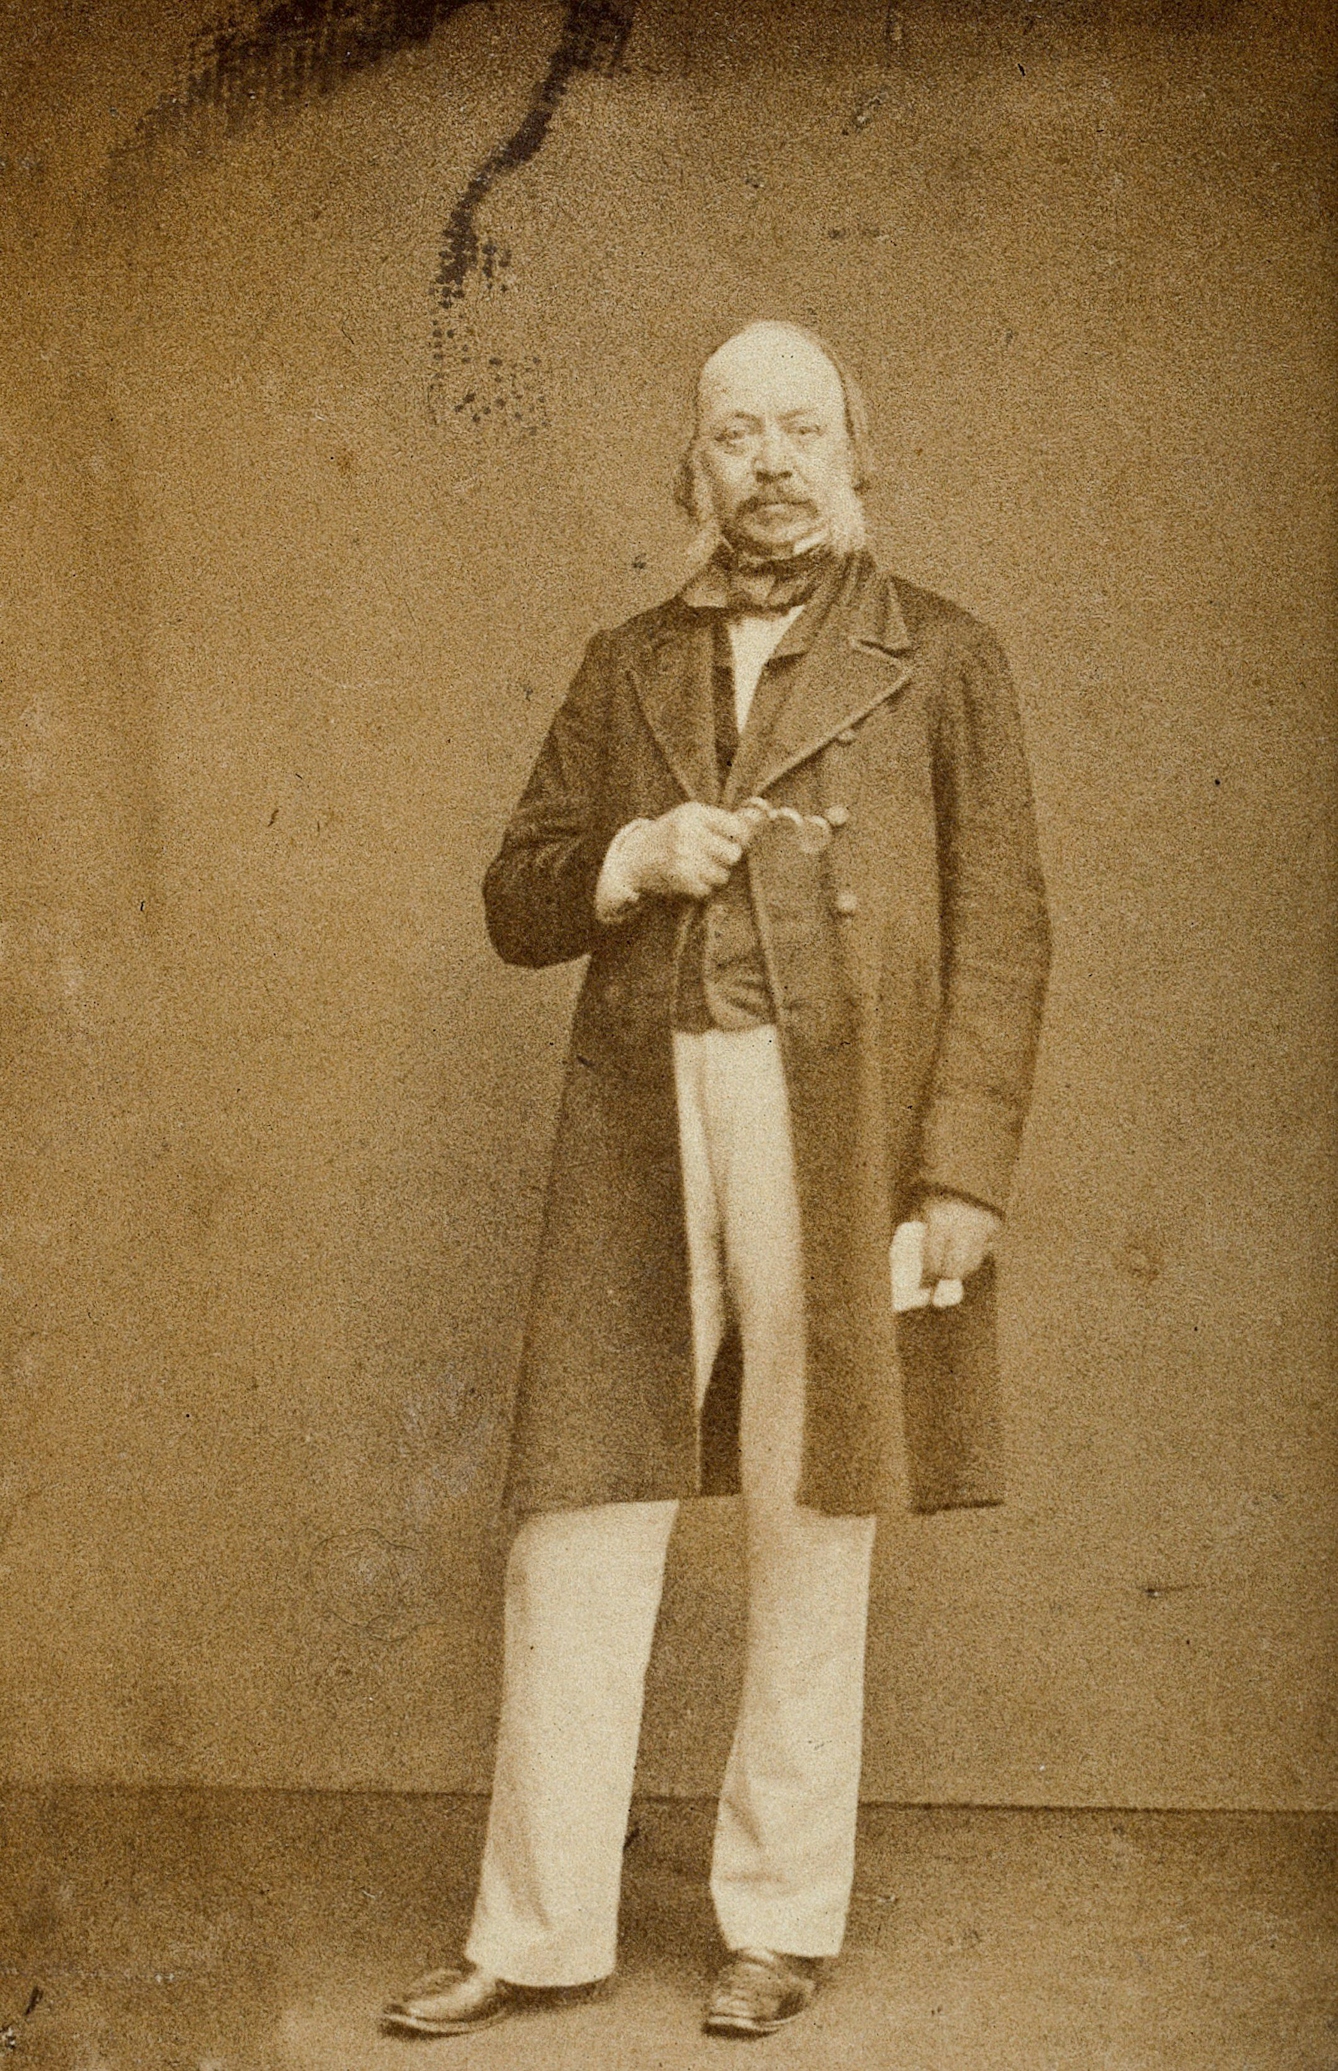 A sepia toned photograph of Sir Edwin Chadwick. A Victorian man with facial hair wearing a long coat with pale trousers and holding pair of glasses.